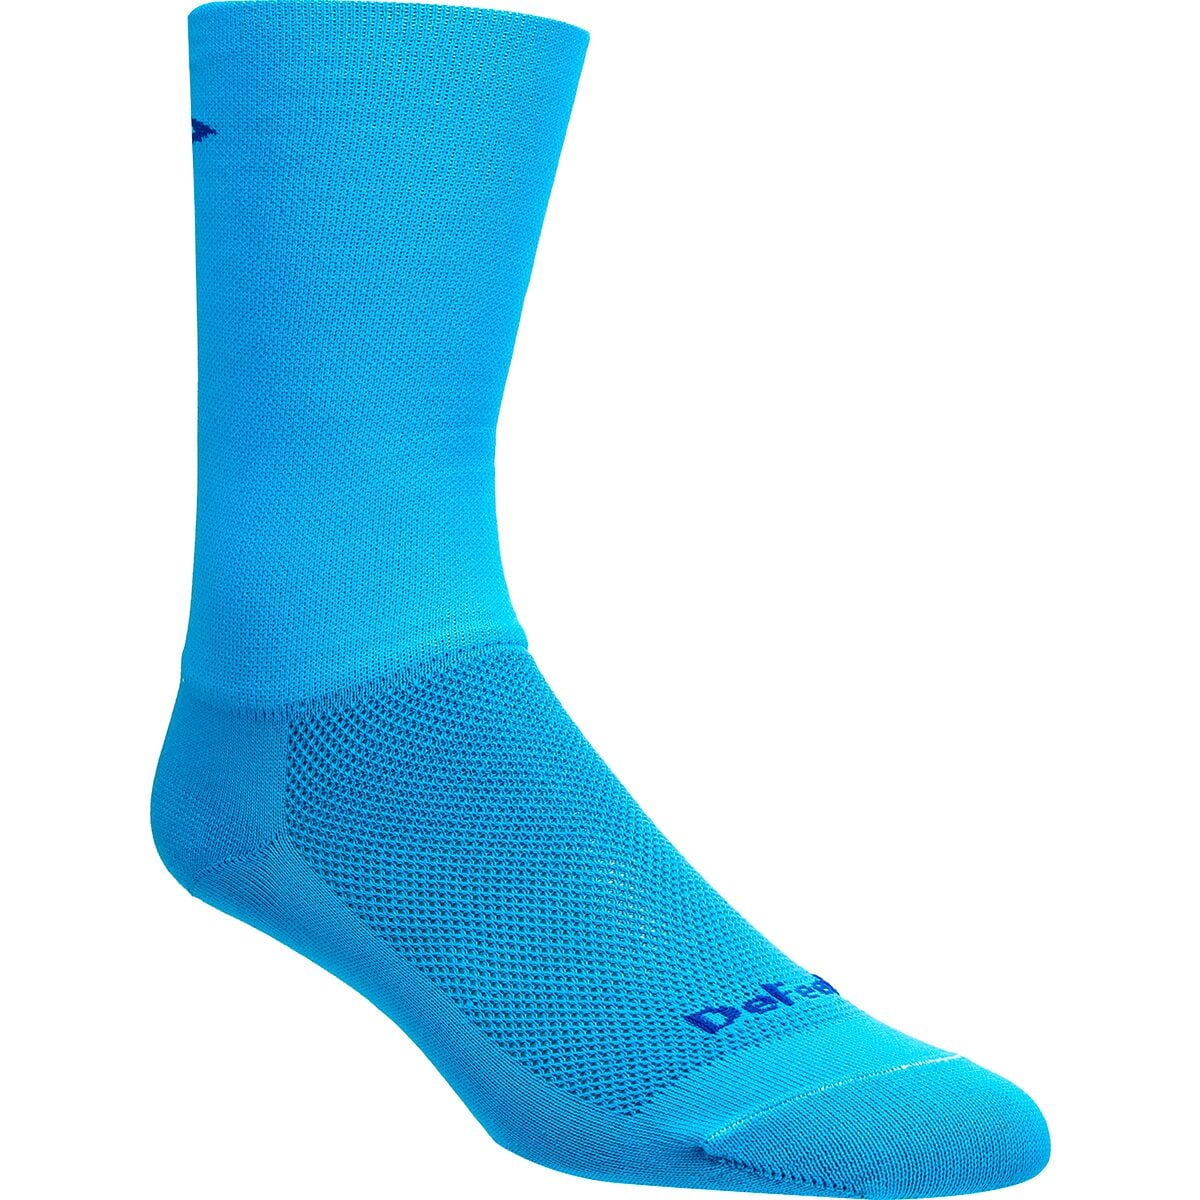 DeFeet Aireator 1 " Athletic Socks Multiple Sizes Available New Starlight 